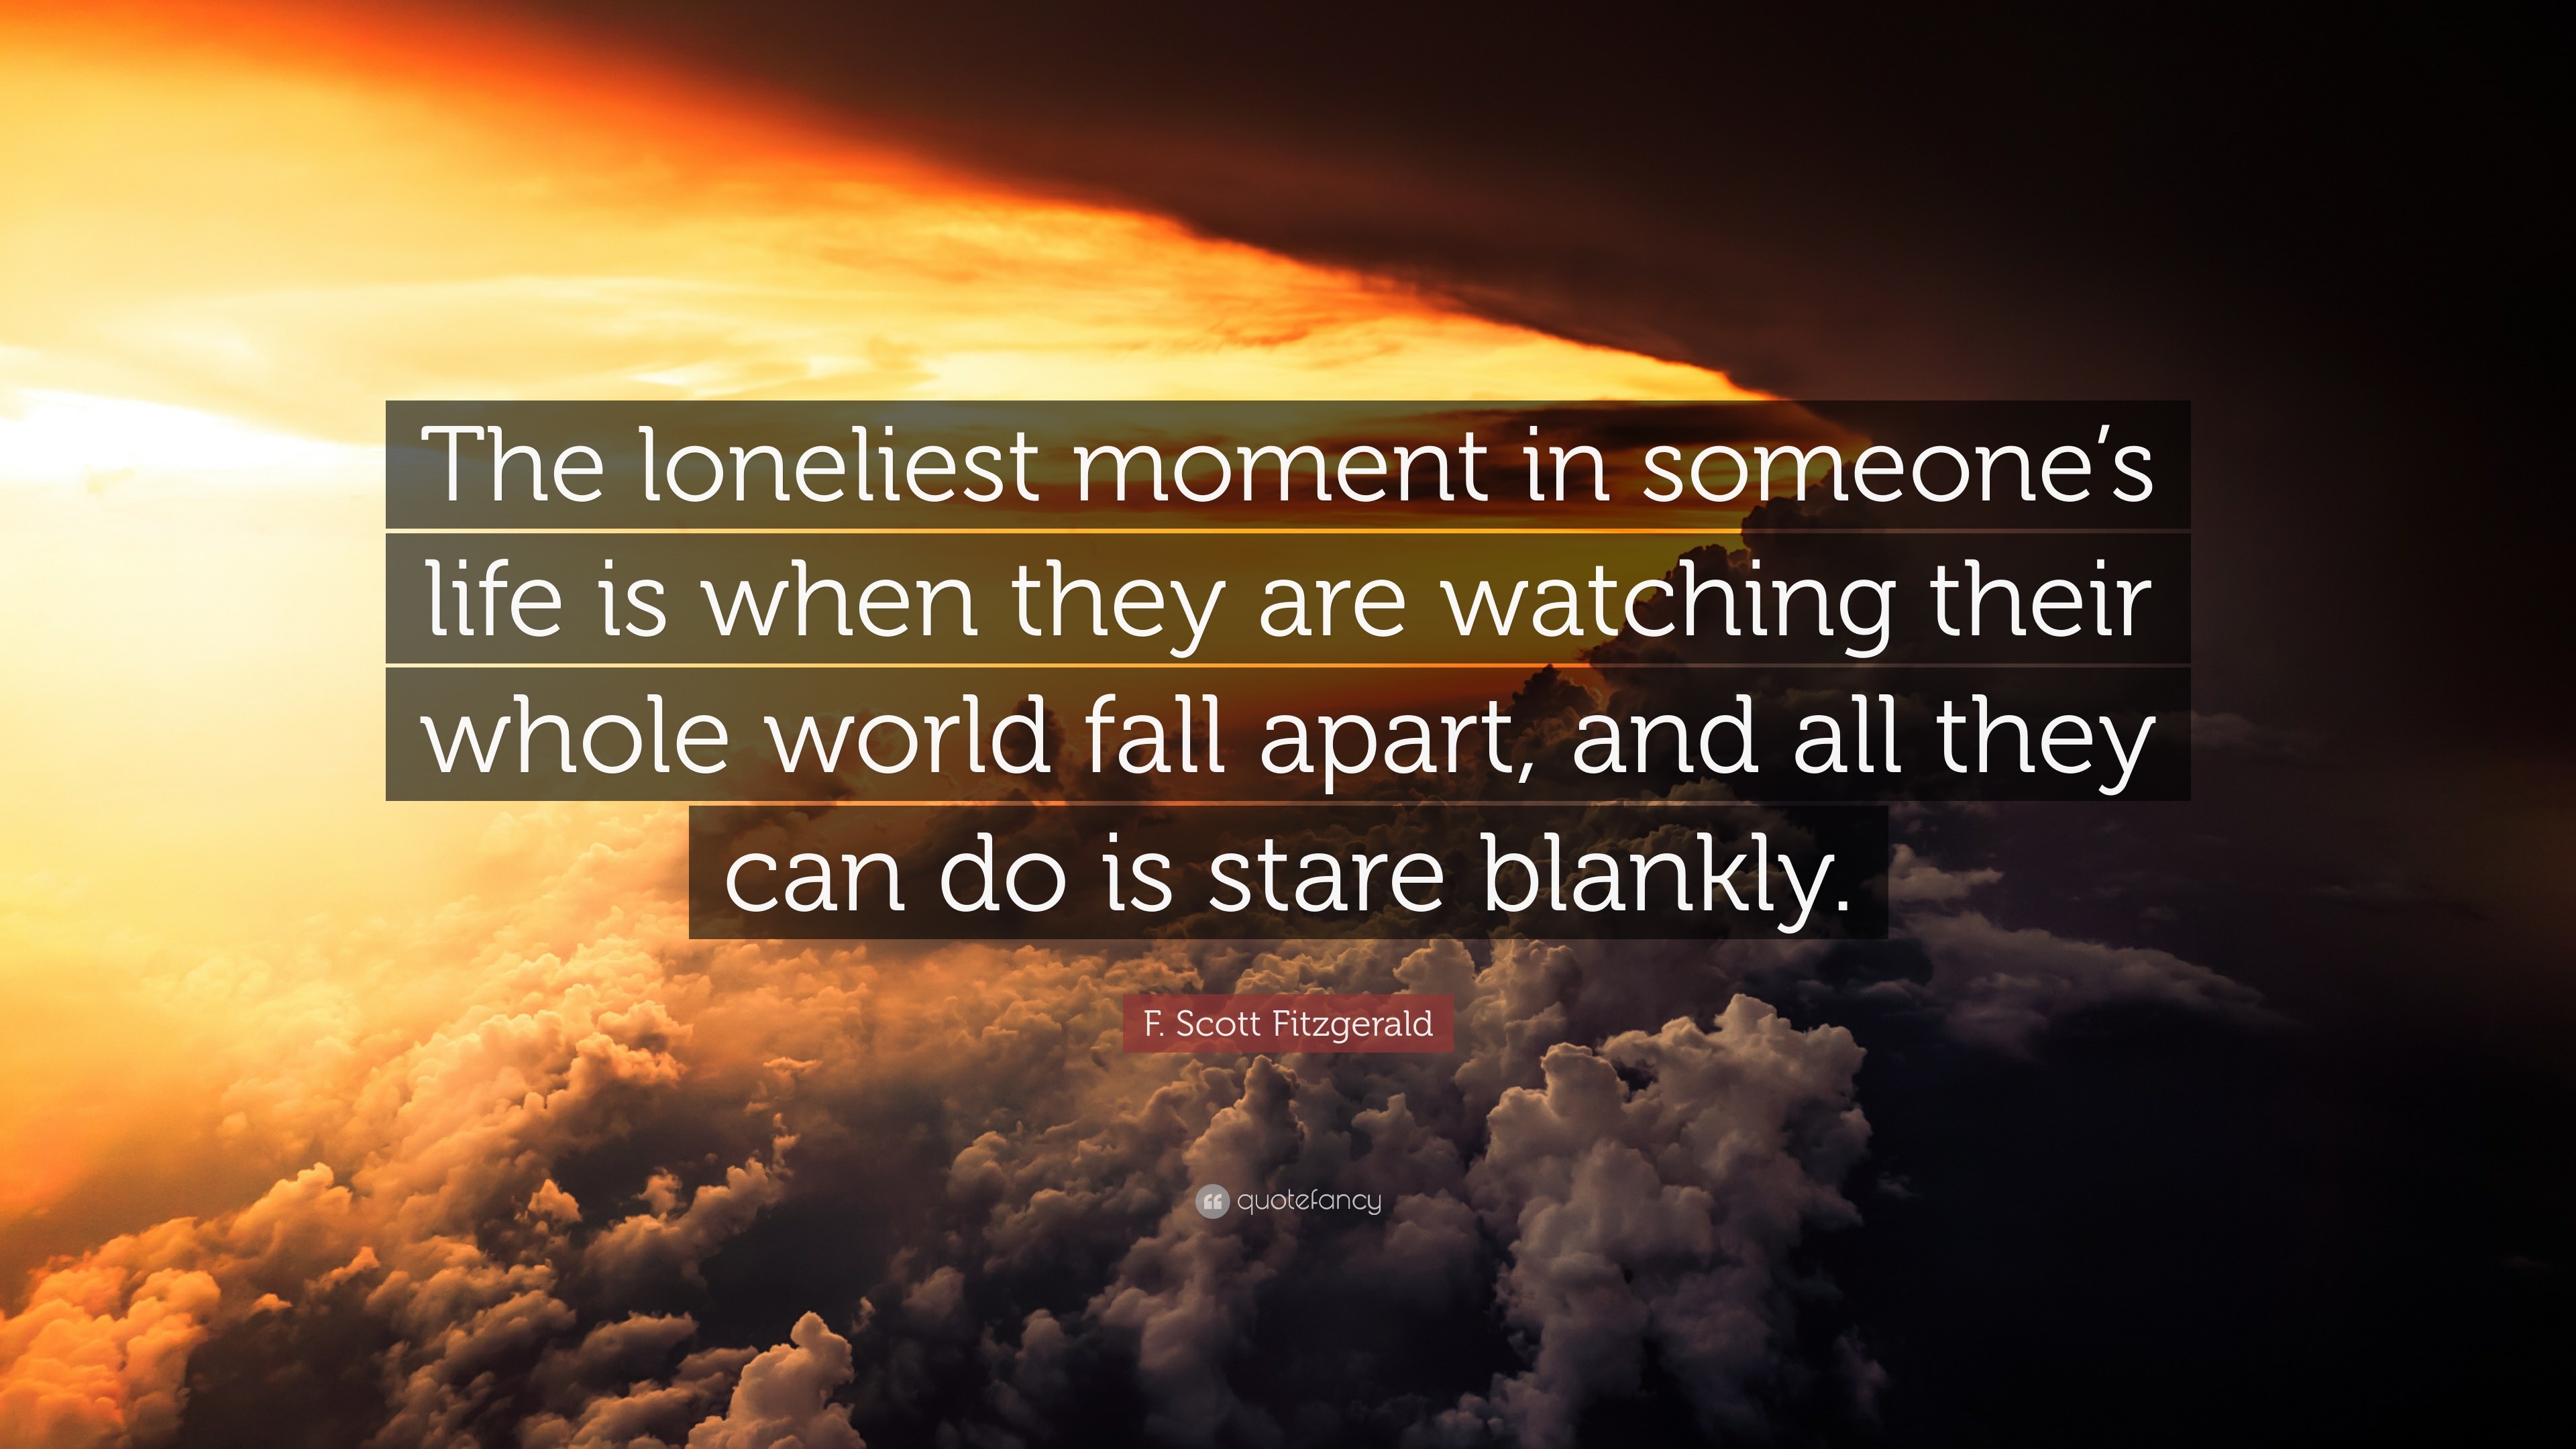 1730290 F Scott Fitzgerald Quote The loneliest moment in someone s life is